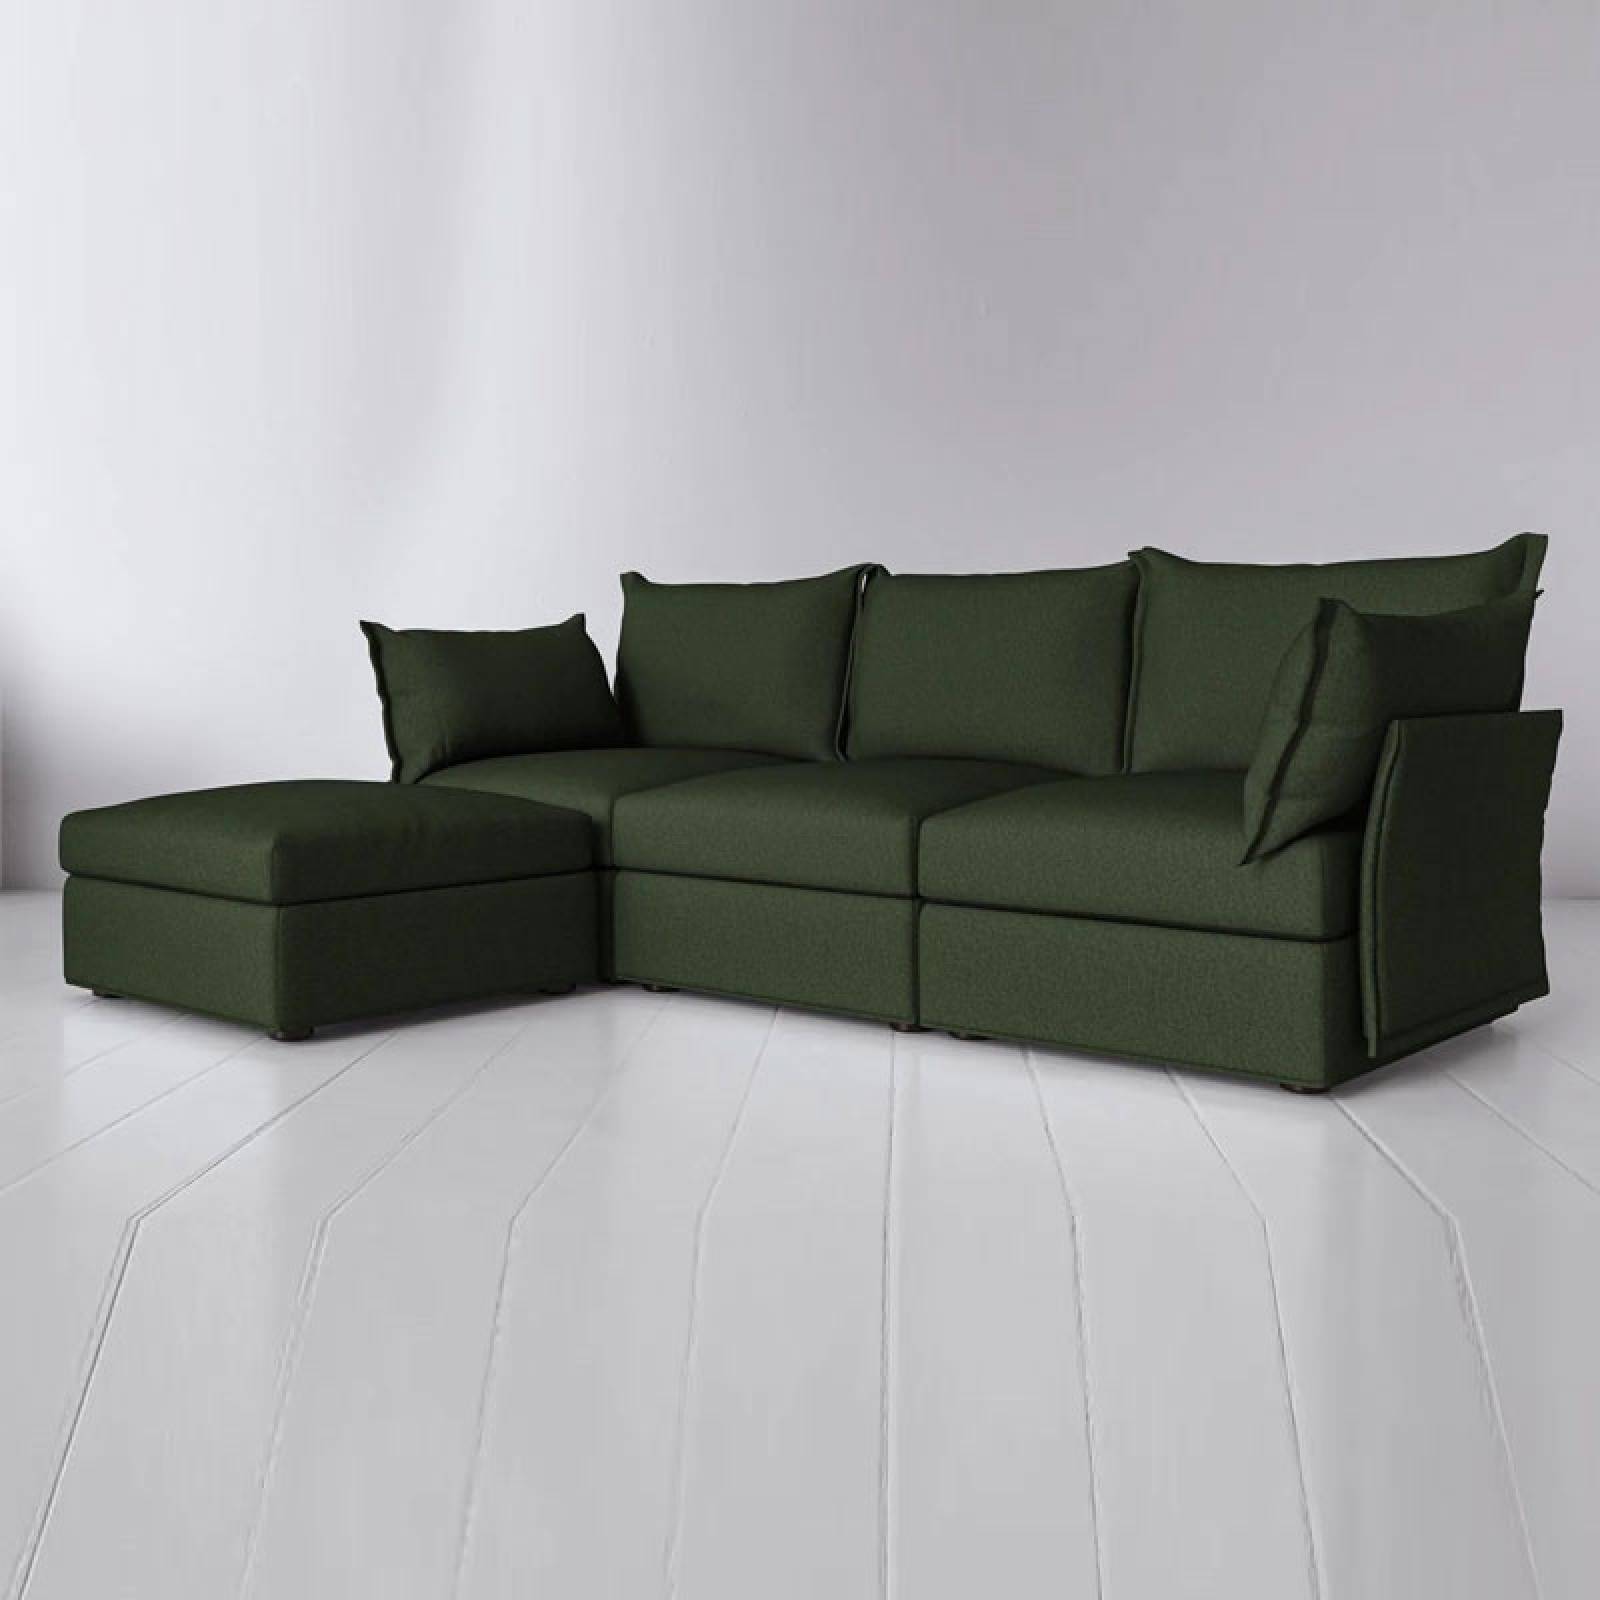 Swyft - Model 06 - 3 Seater Chaise Sofa - Left or Right thumbnails